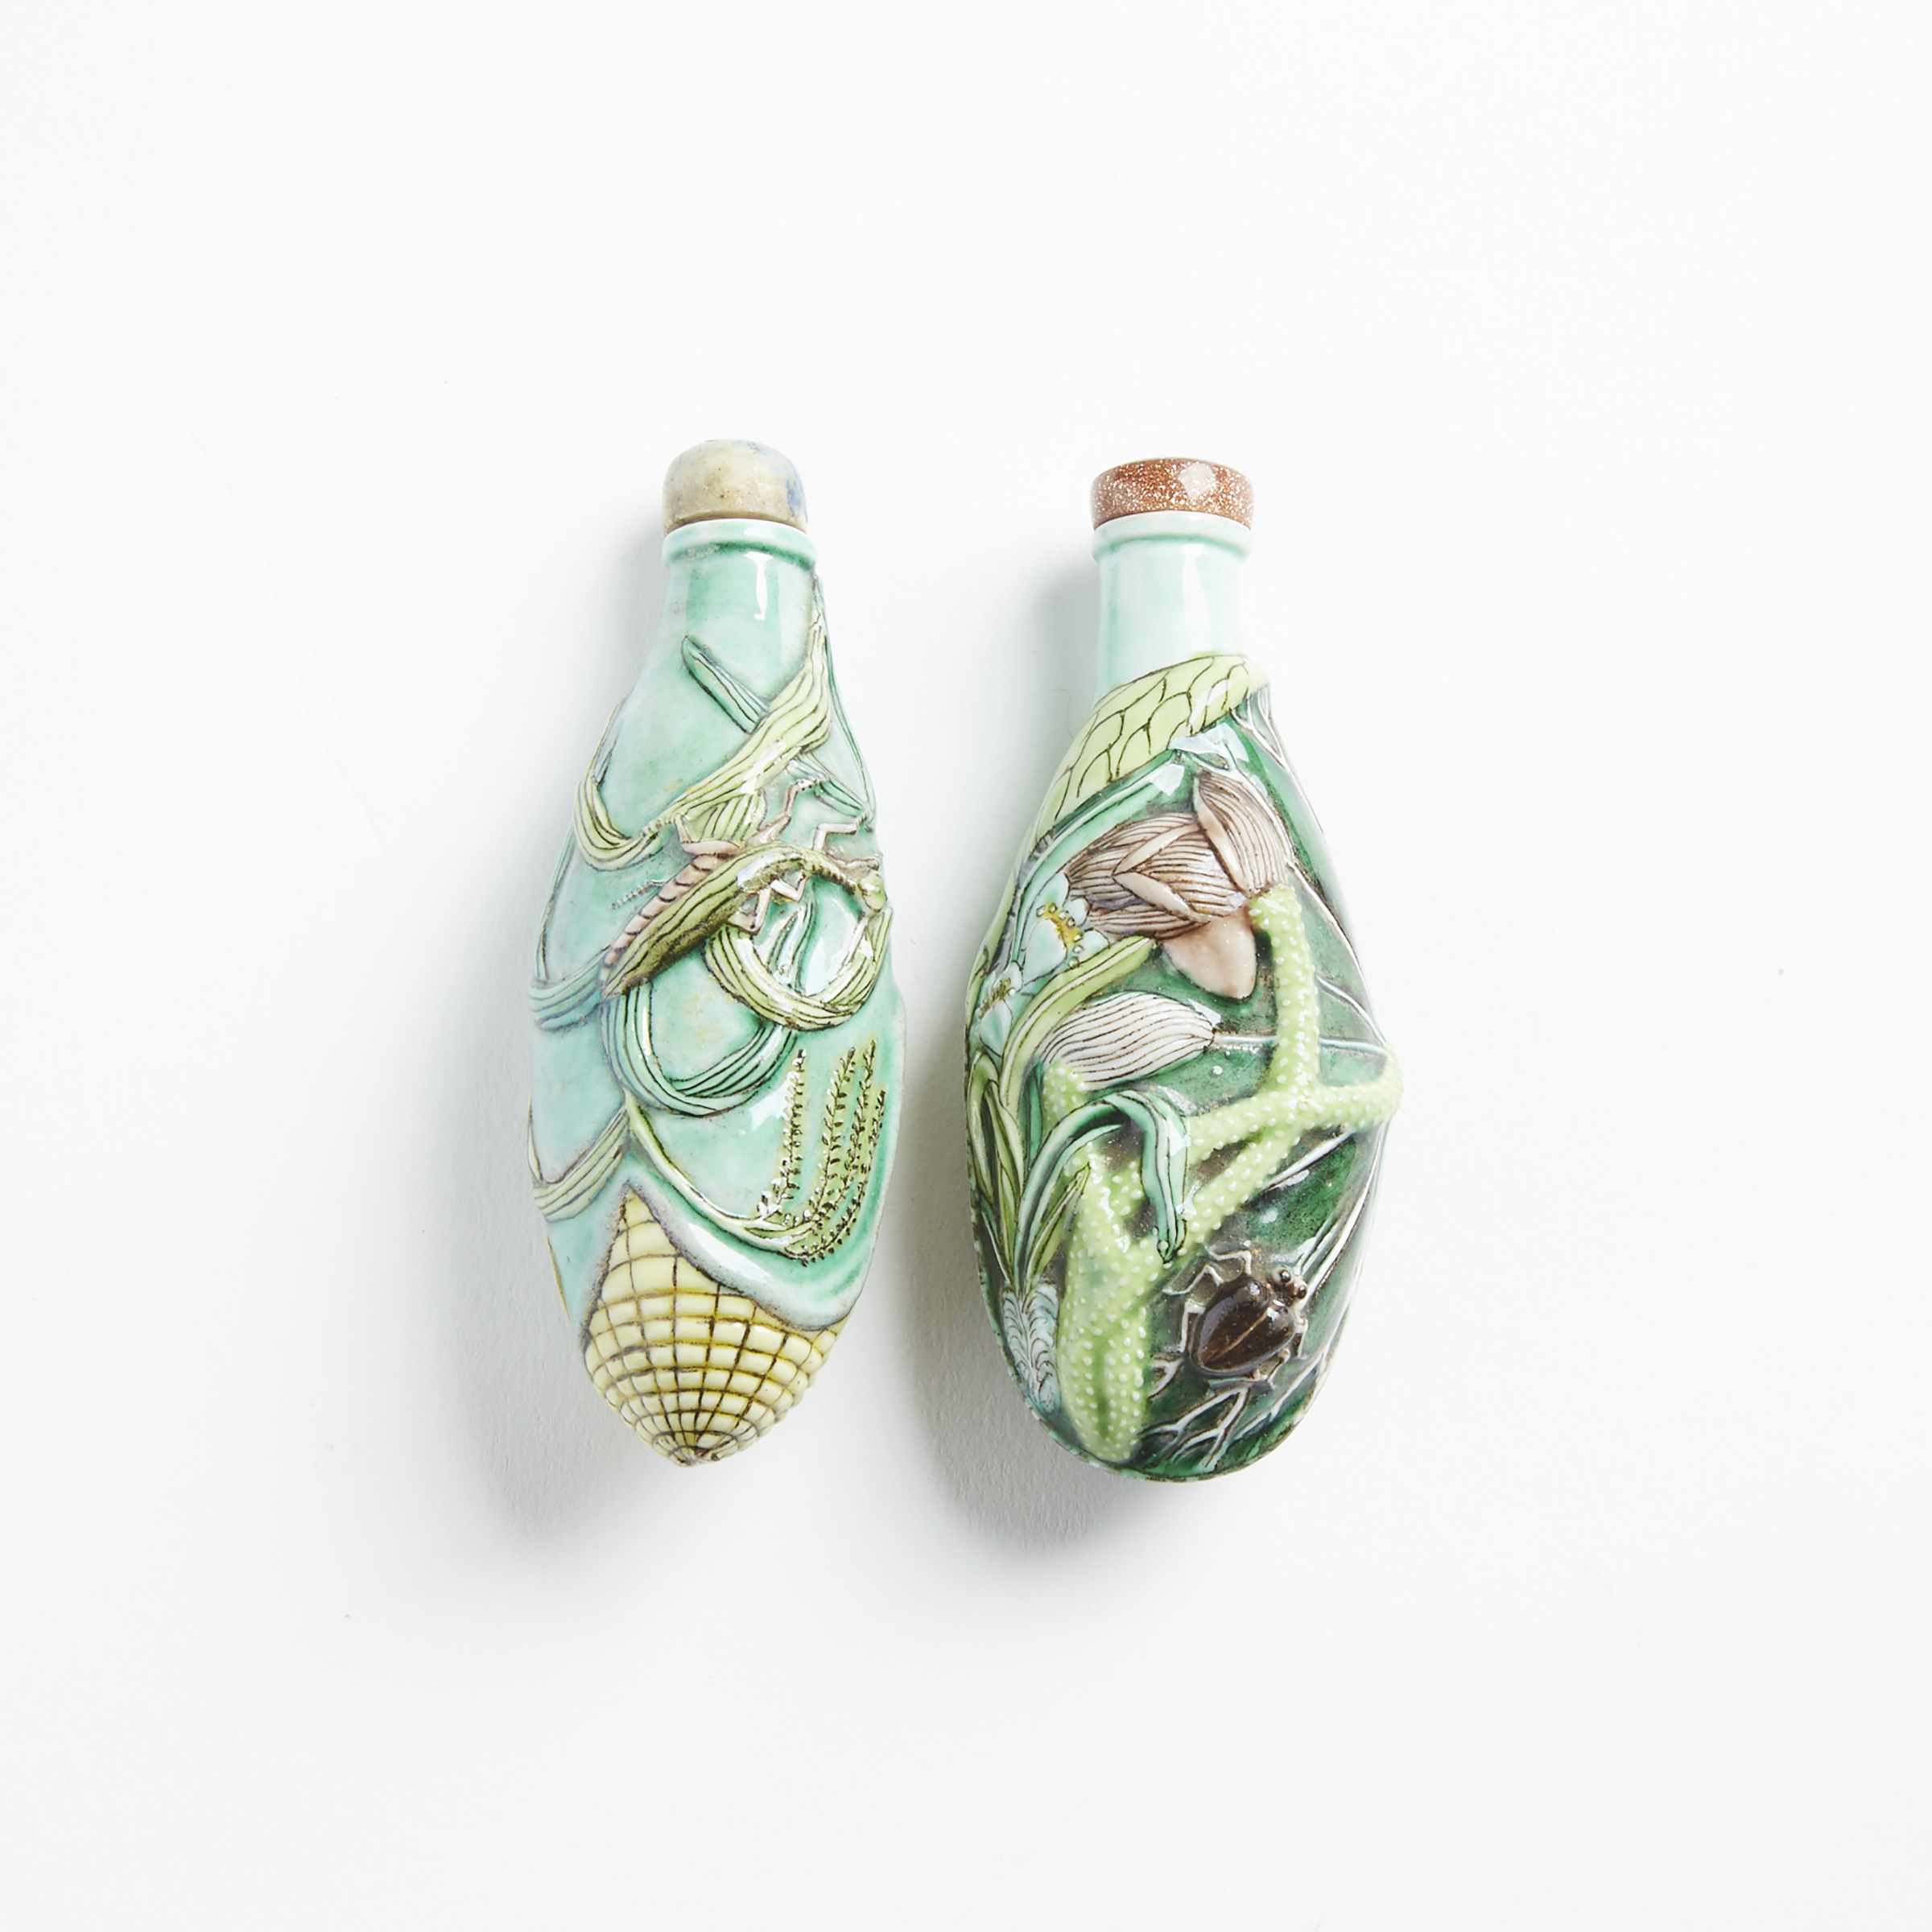 Two Moulded Porcelain 'Corn' and 'Lotus-Form' Snuff Bottles, 19th/Early 20th Century